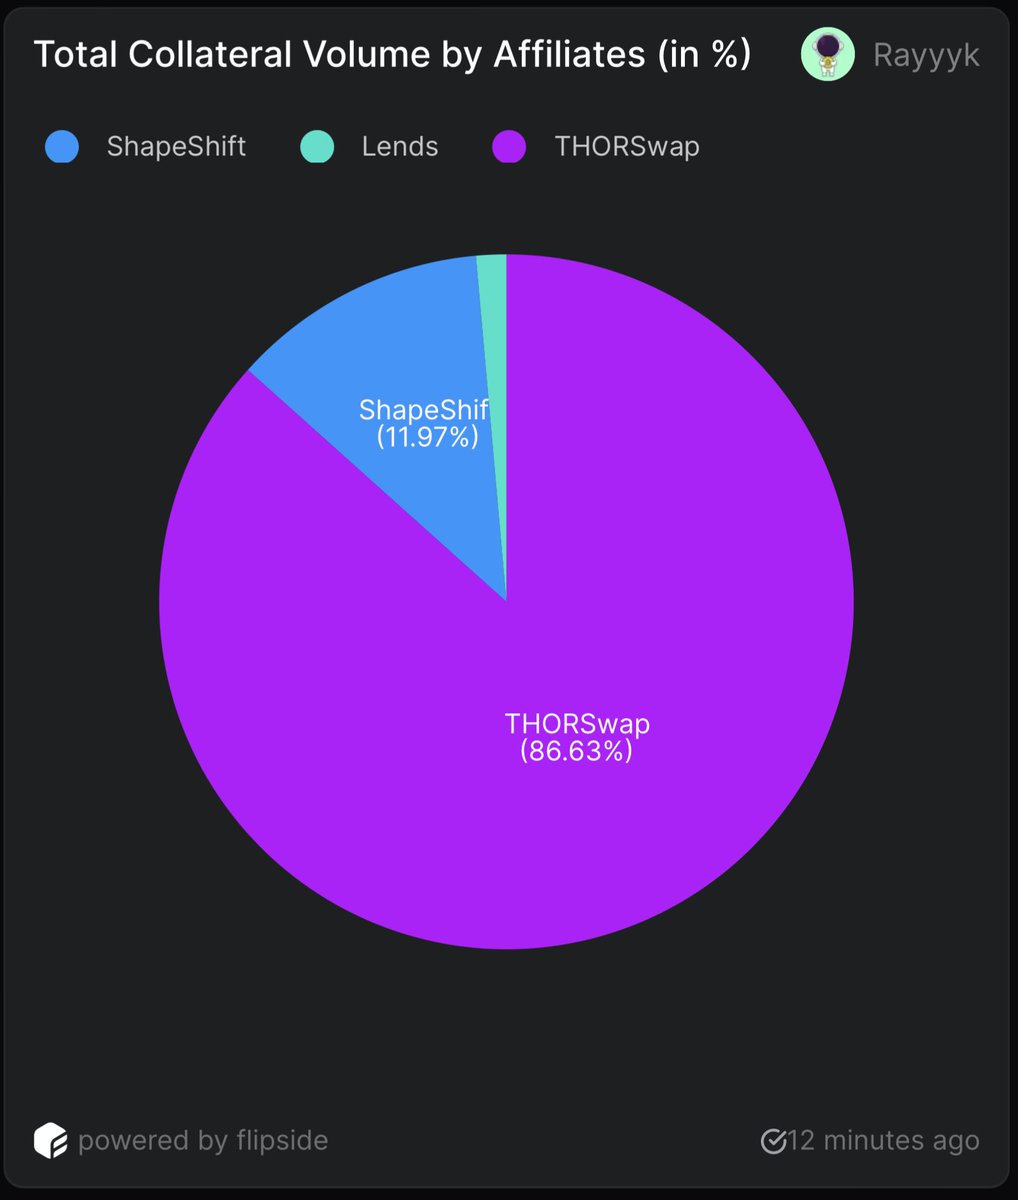 Lending collateral volume from @THORSwap accounts for more than 86% of the total volume across all of @THORChain's Lending Affiliates.